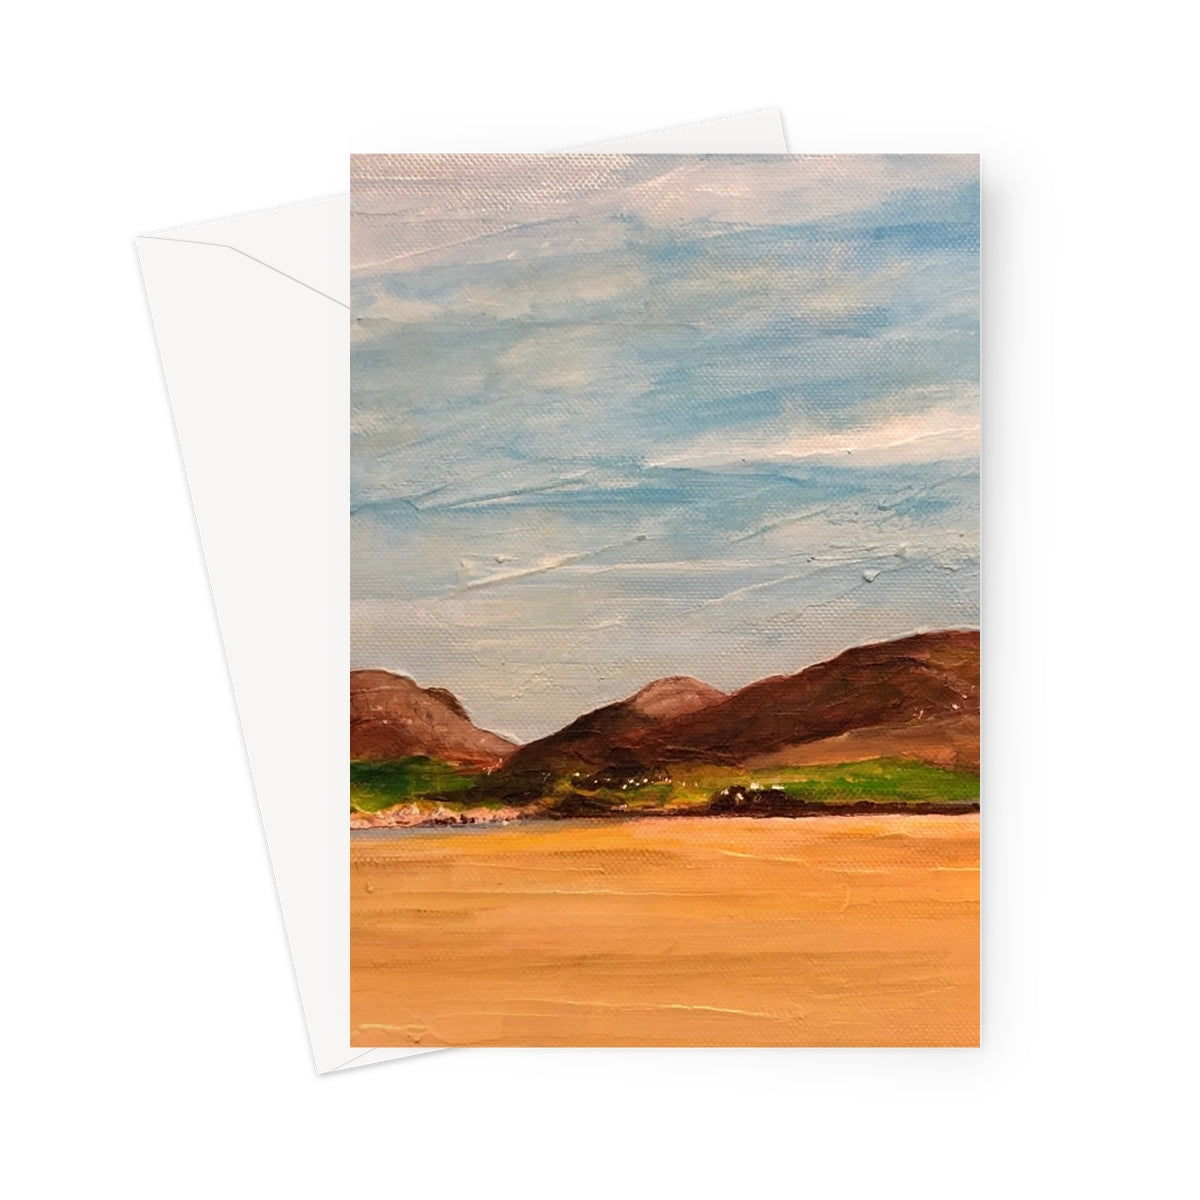 Uig Sands Lewis Art Gifts Greeting Card-Greetings Cards-Hebridean Islands Art Gallery-5"x7"-1 Card-Paintings, Prints, Homeware, Art Gifts From Scotland By Scottish Artist Kevin Hunter